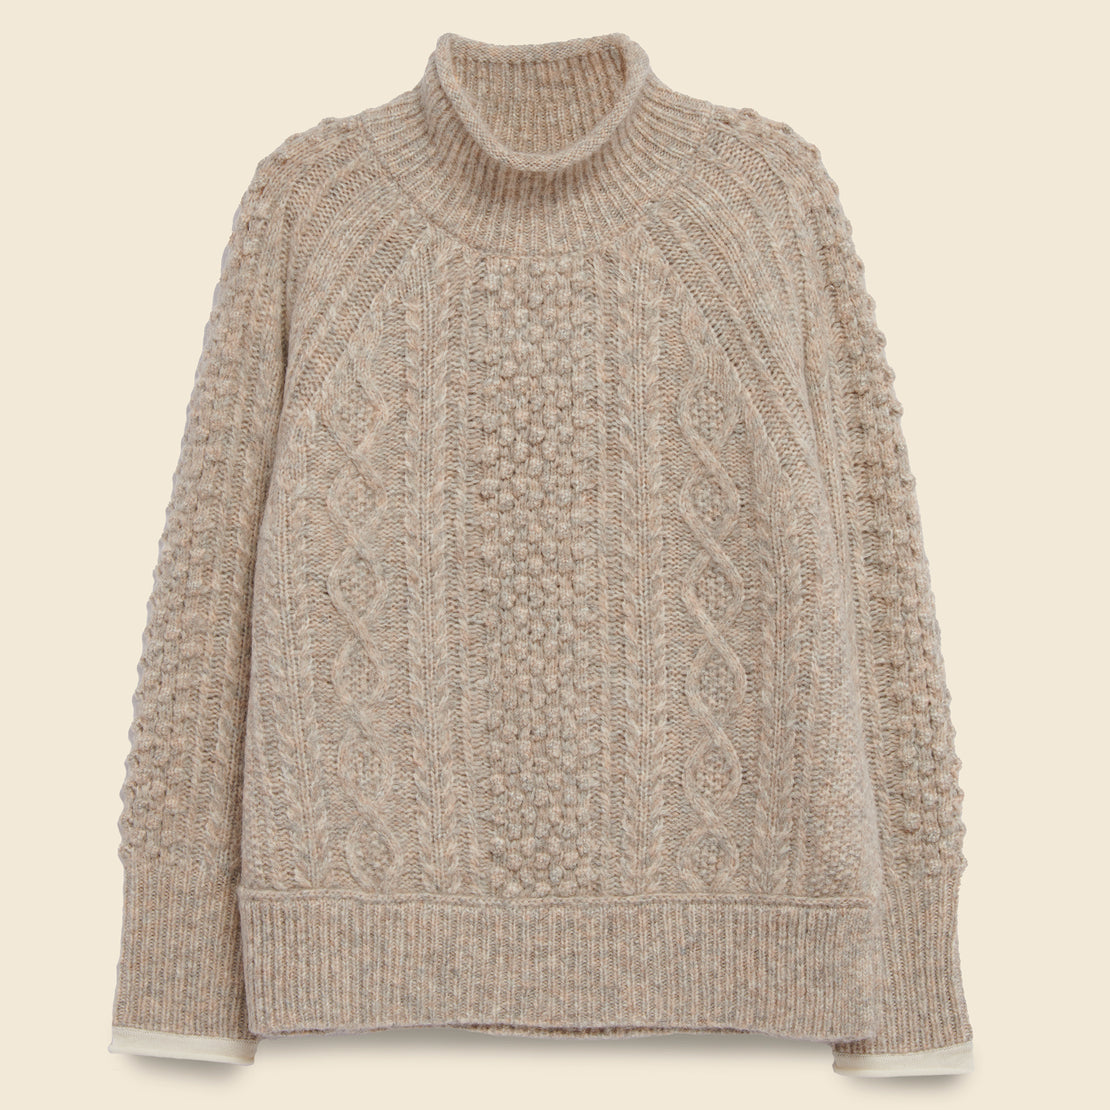 Alex Mill Camil Cable Sweater - Driftwood